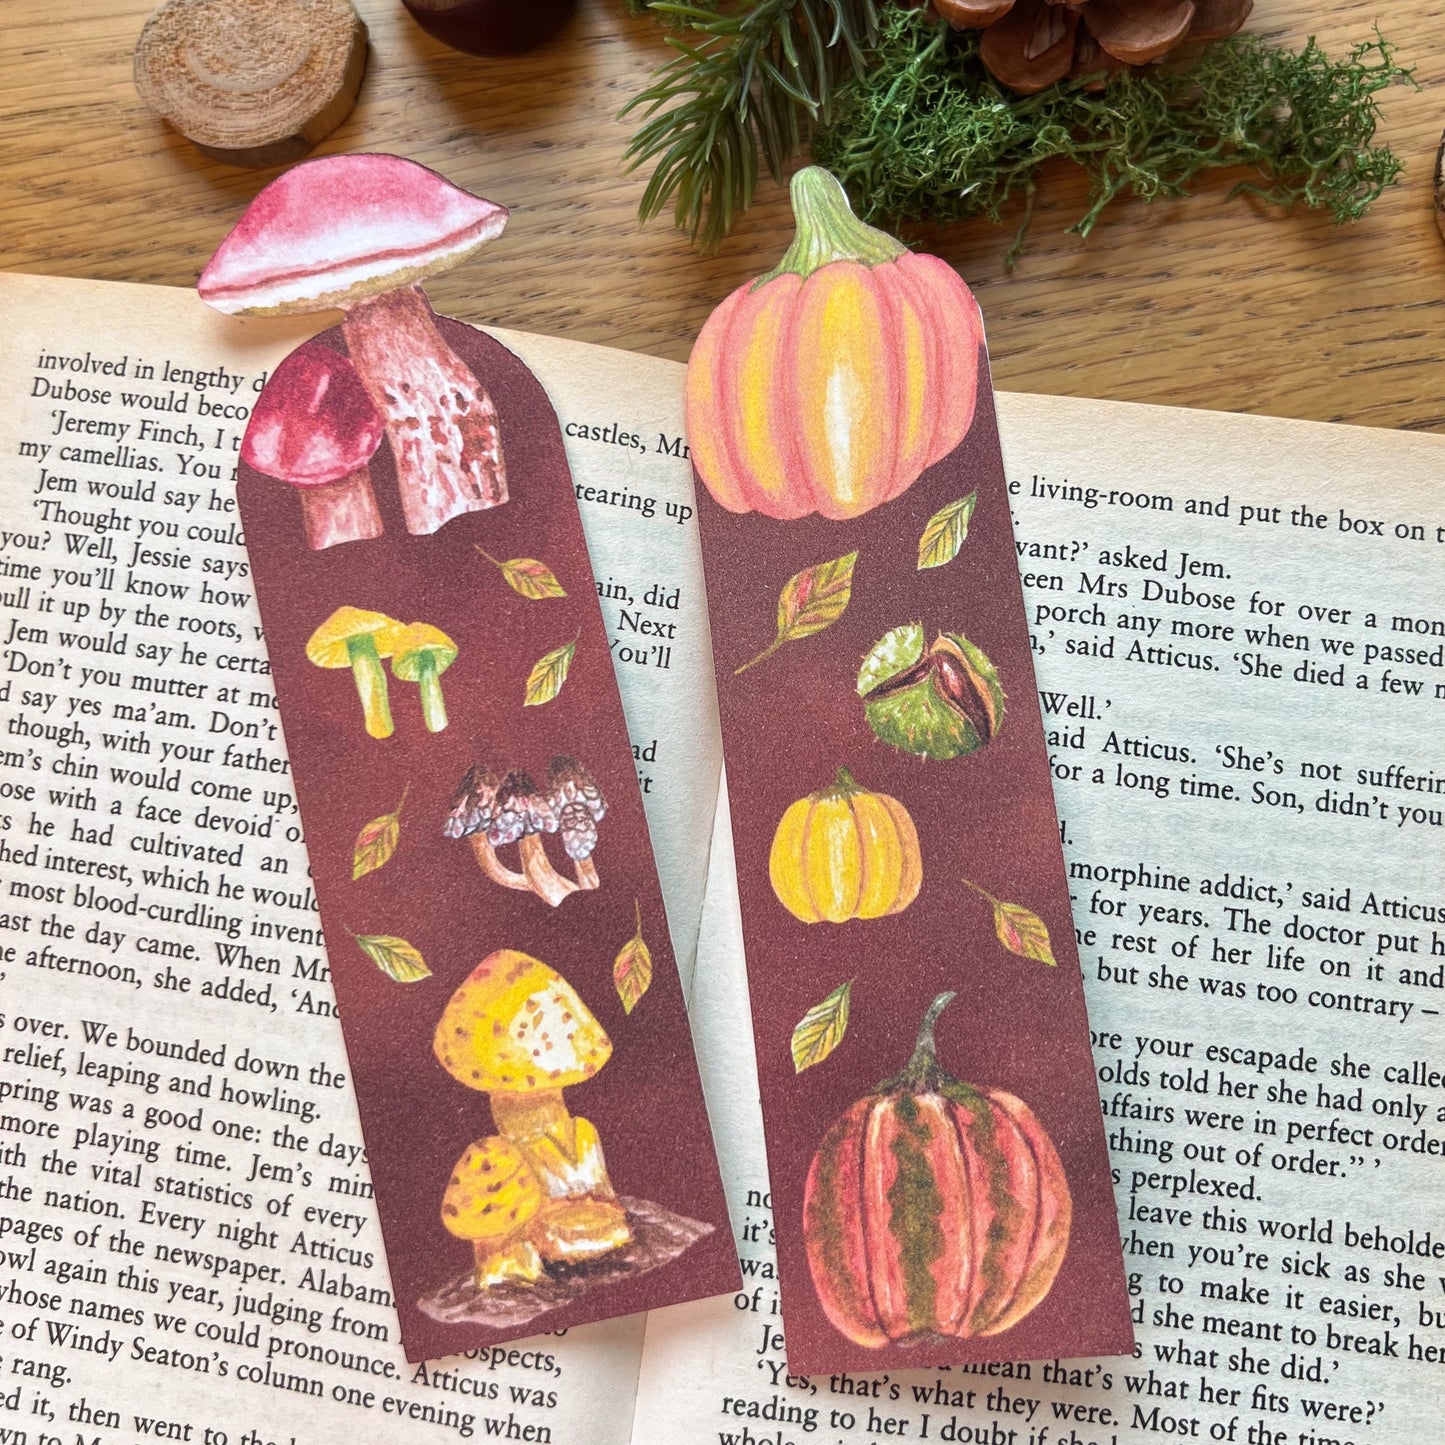 Fall Forage Pumpkin Bookmark featuring two orange and one yellow pumpkins with autmnal leabes tumbling dow the illustrated bookmark. An orange Cinderella pumpkin is cut out at the top, and the bookmark is resting on the open pages of a book next to the Fall Forage Mushrooms bookmark which features Mushrooms acorss the warm tones instead.